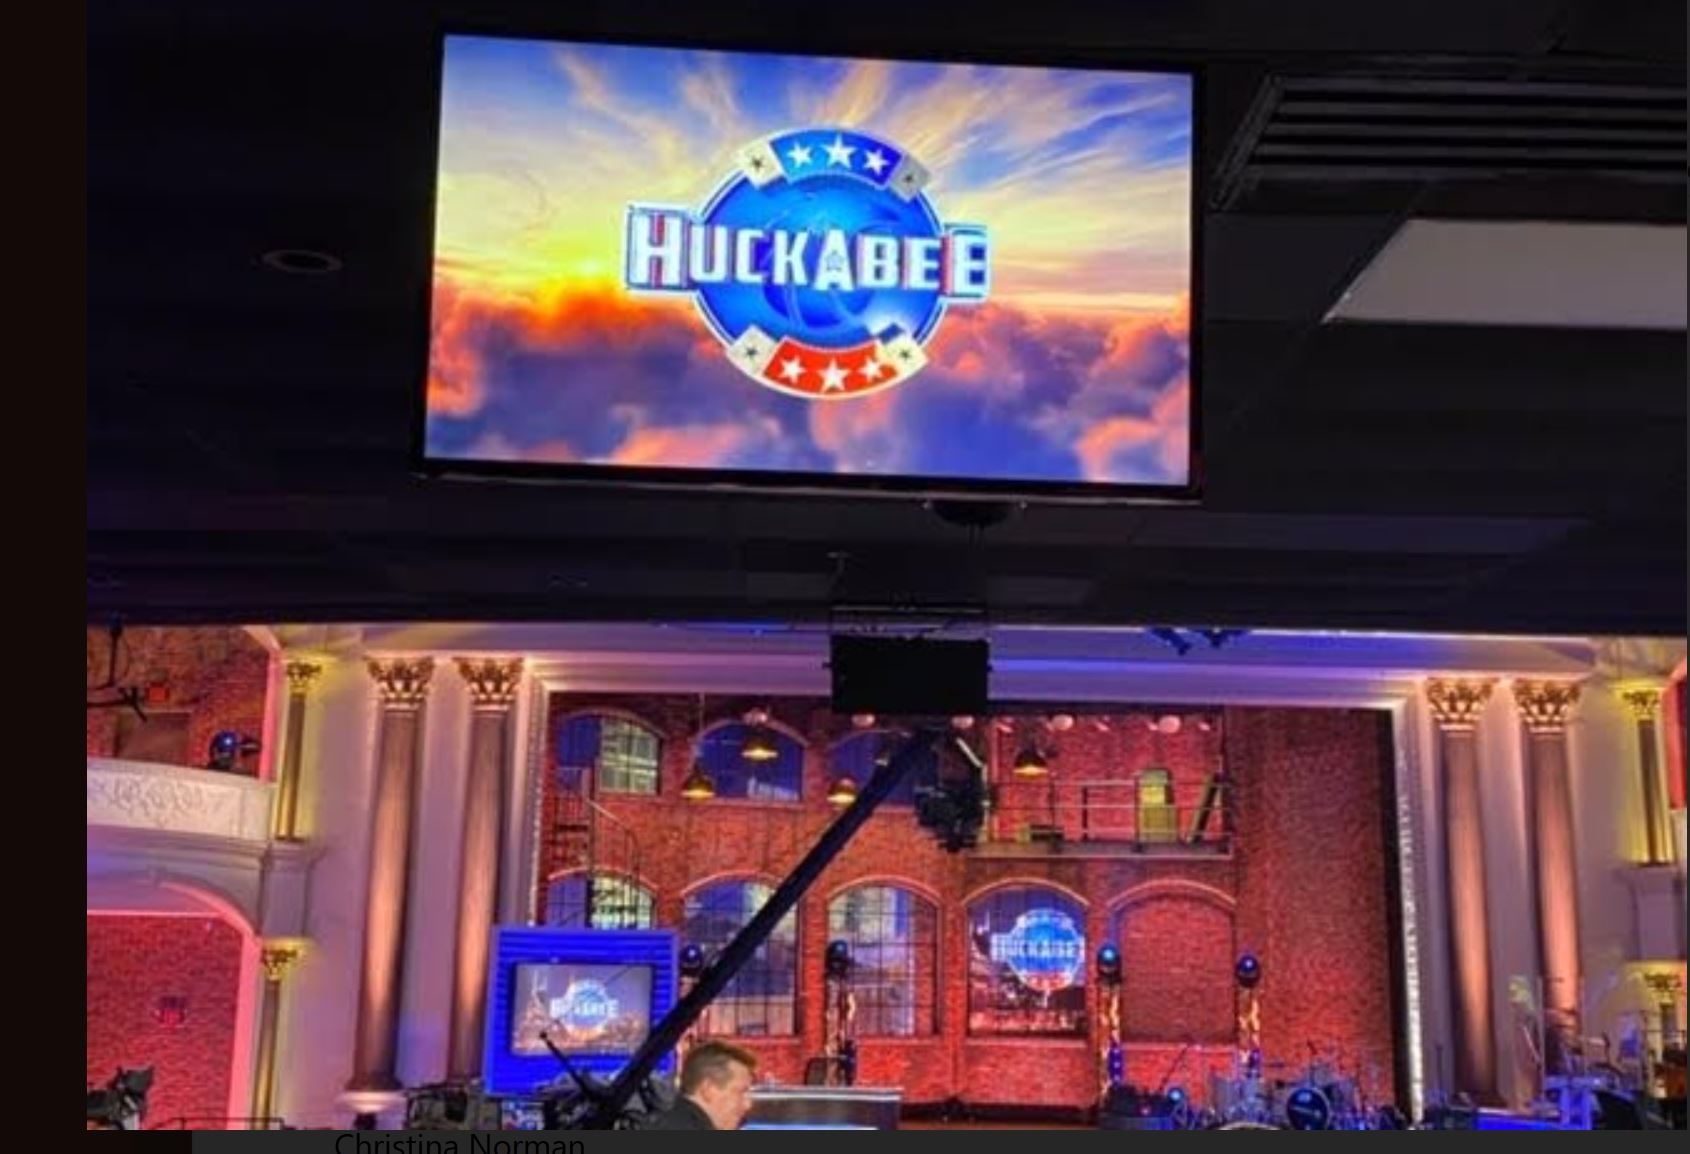 Climate Hustle 2 Kevin Sorbo on Huckabee 8 PM Saturday on TBN